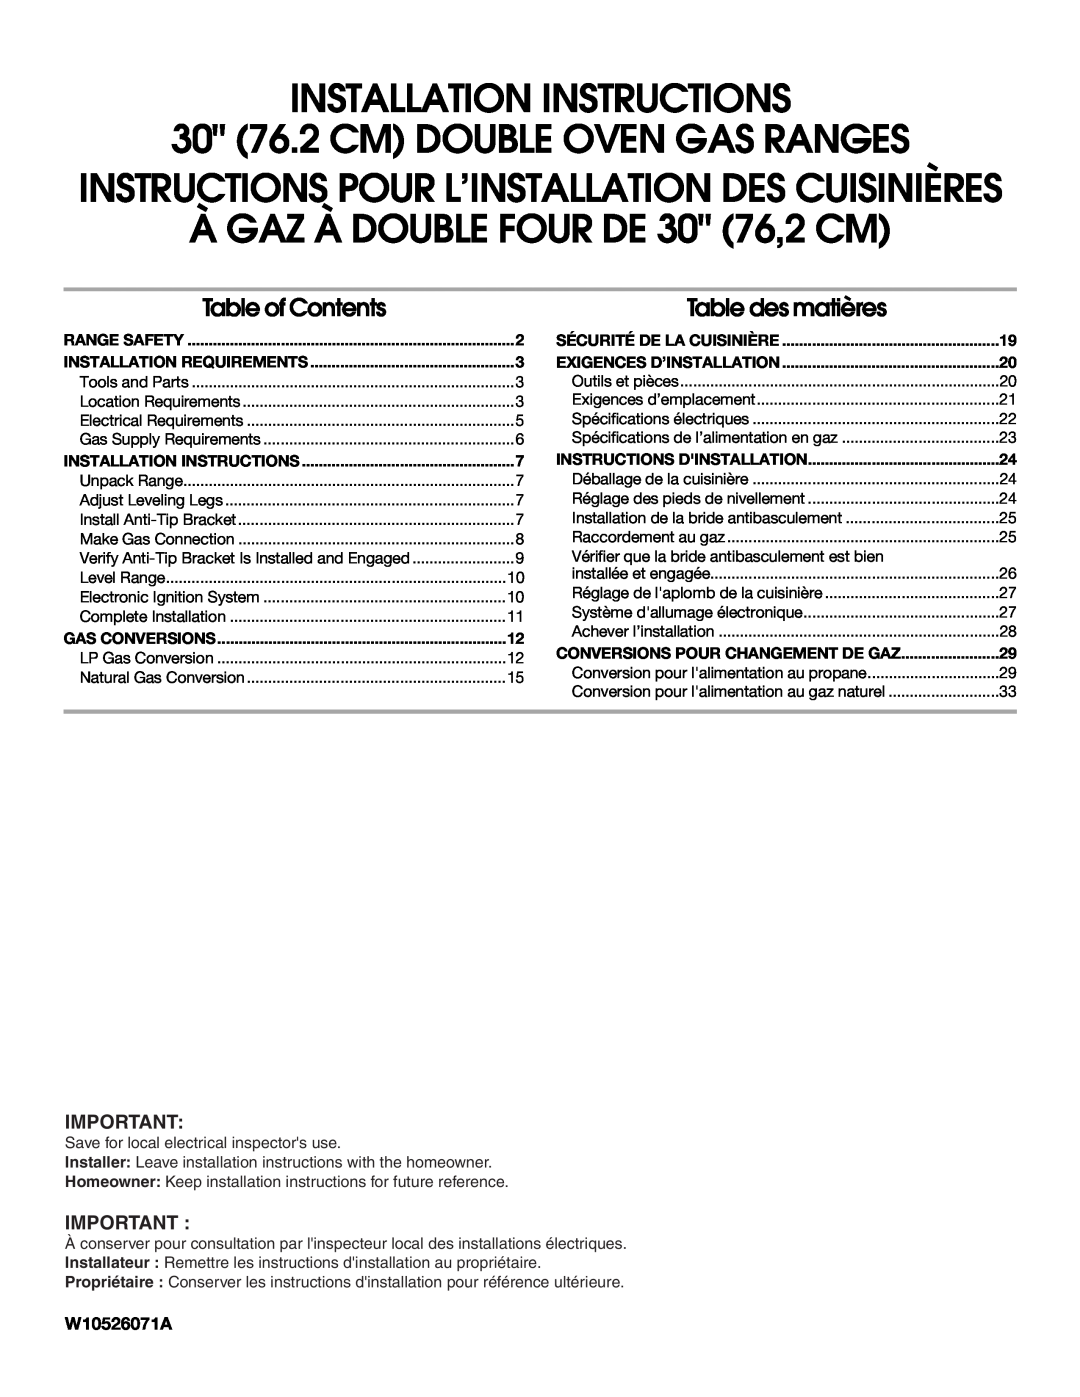 Whirlpool W10526071A installation instructions Instructions Pour L’Installation Des Cuisinières, Installation Instructions 